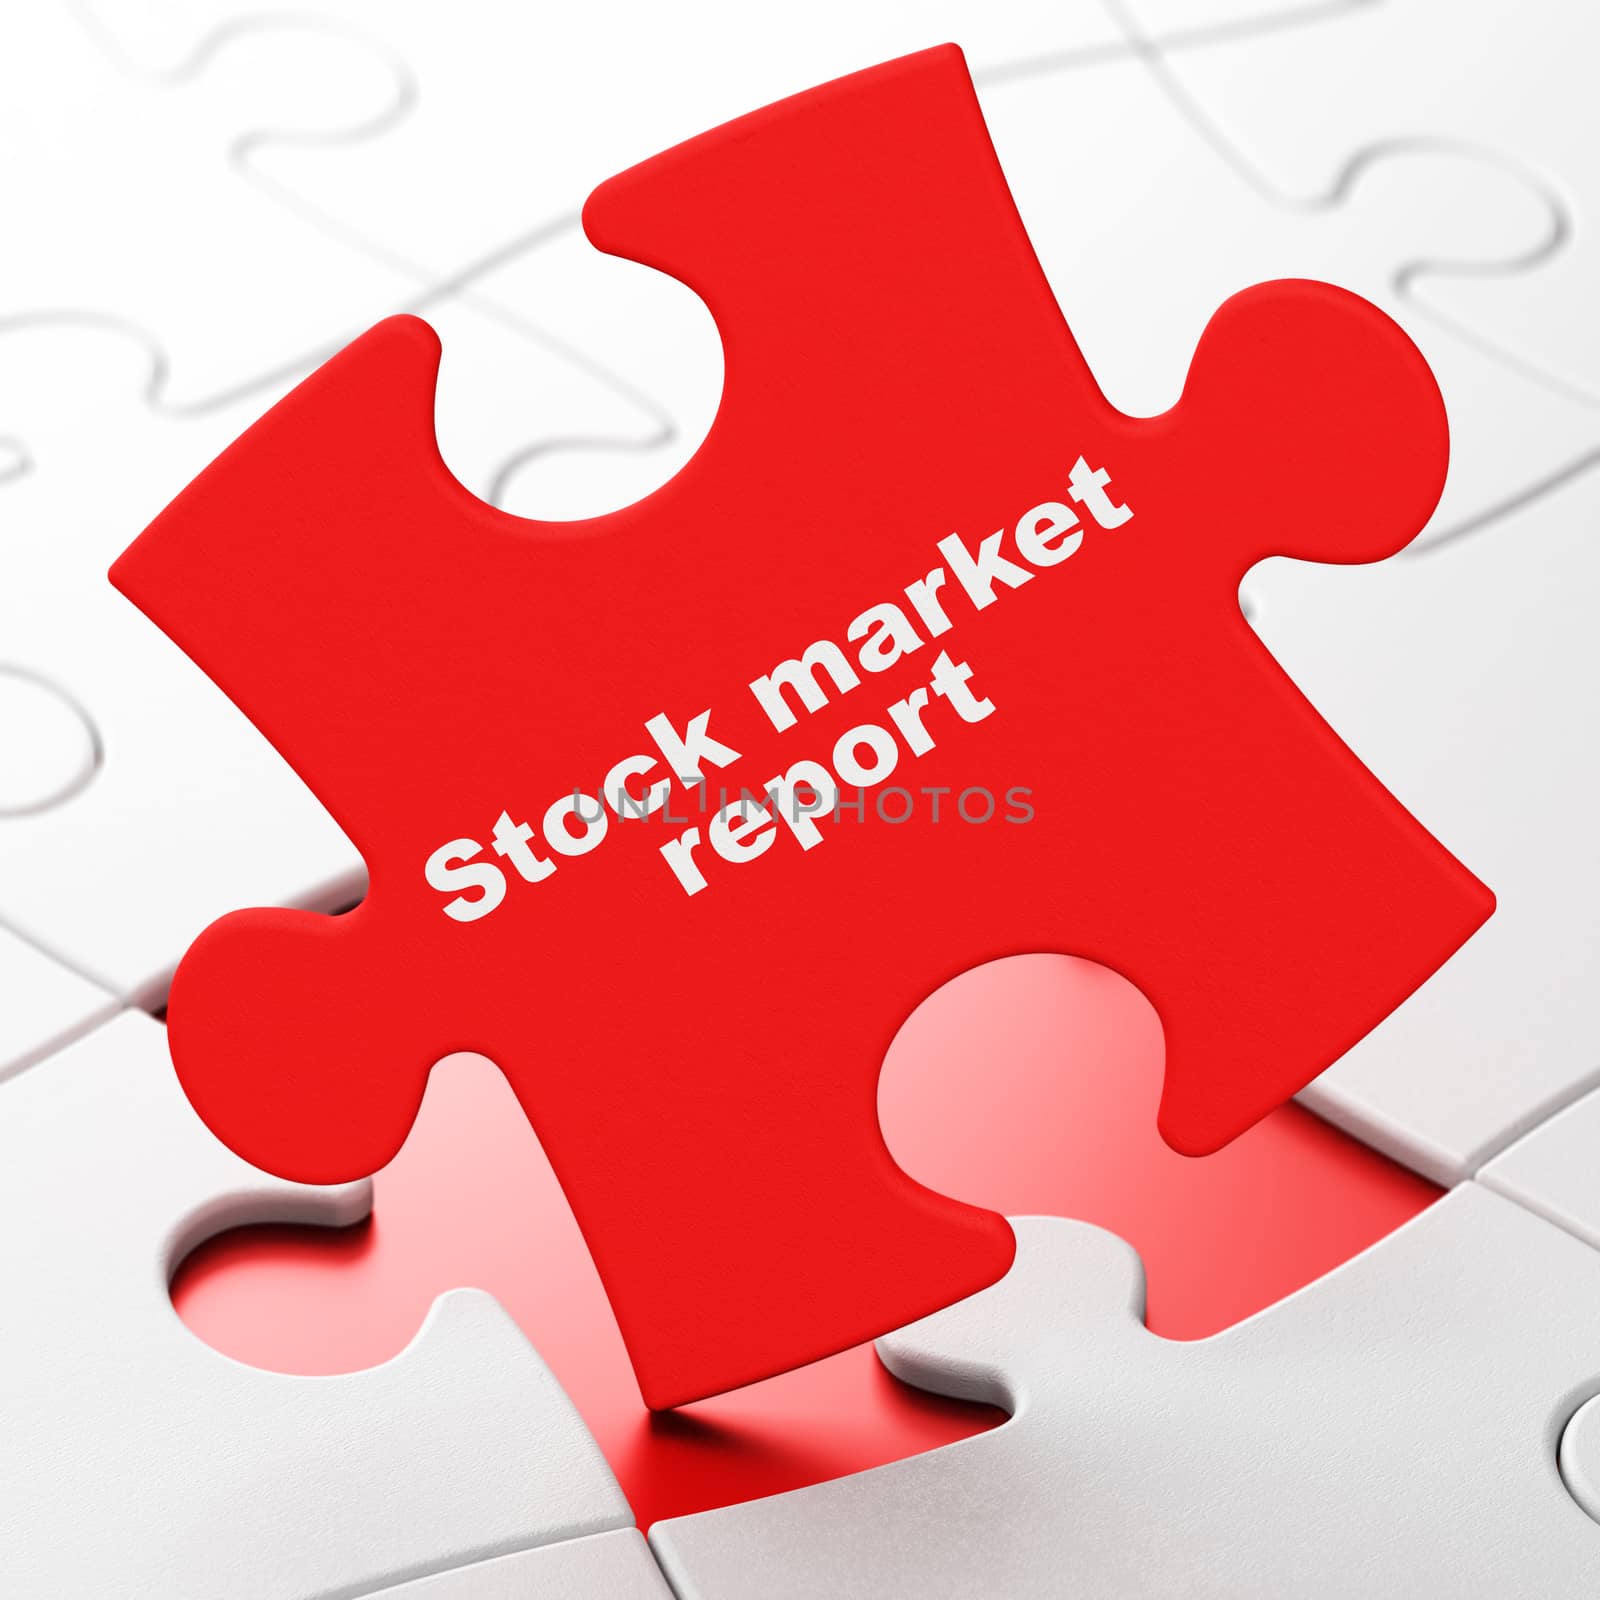 Currency concept: Stock Market Report on puzzle background by maxkabakov